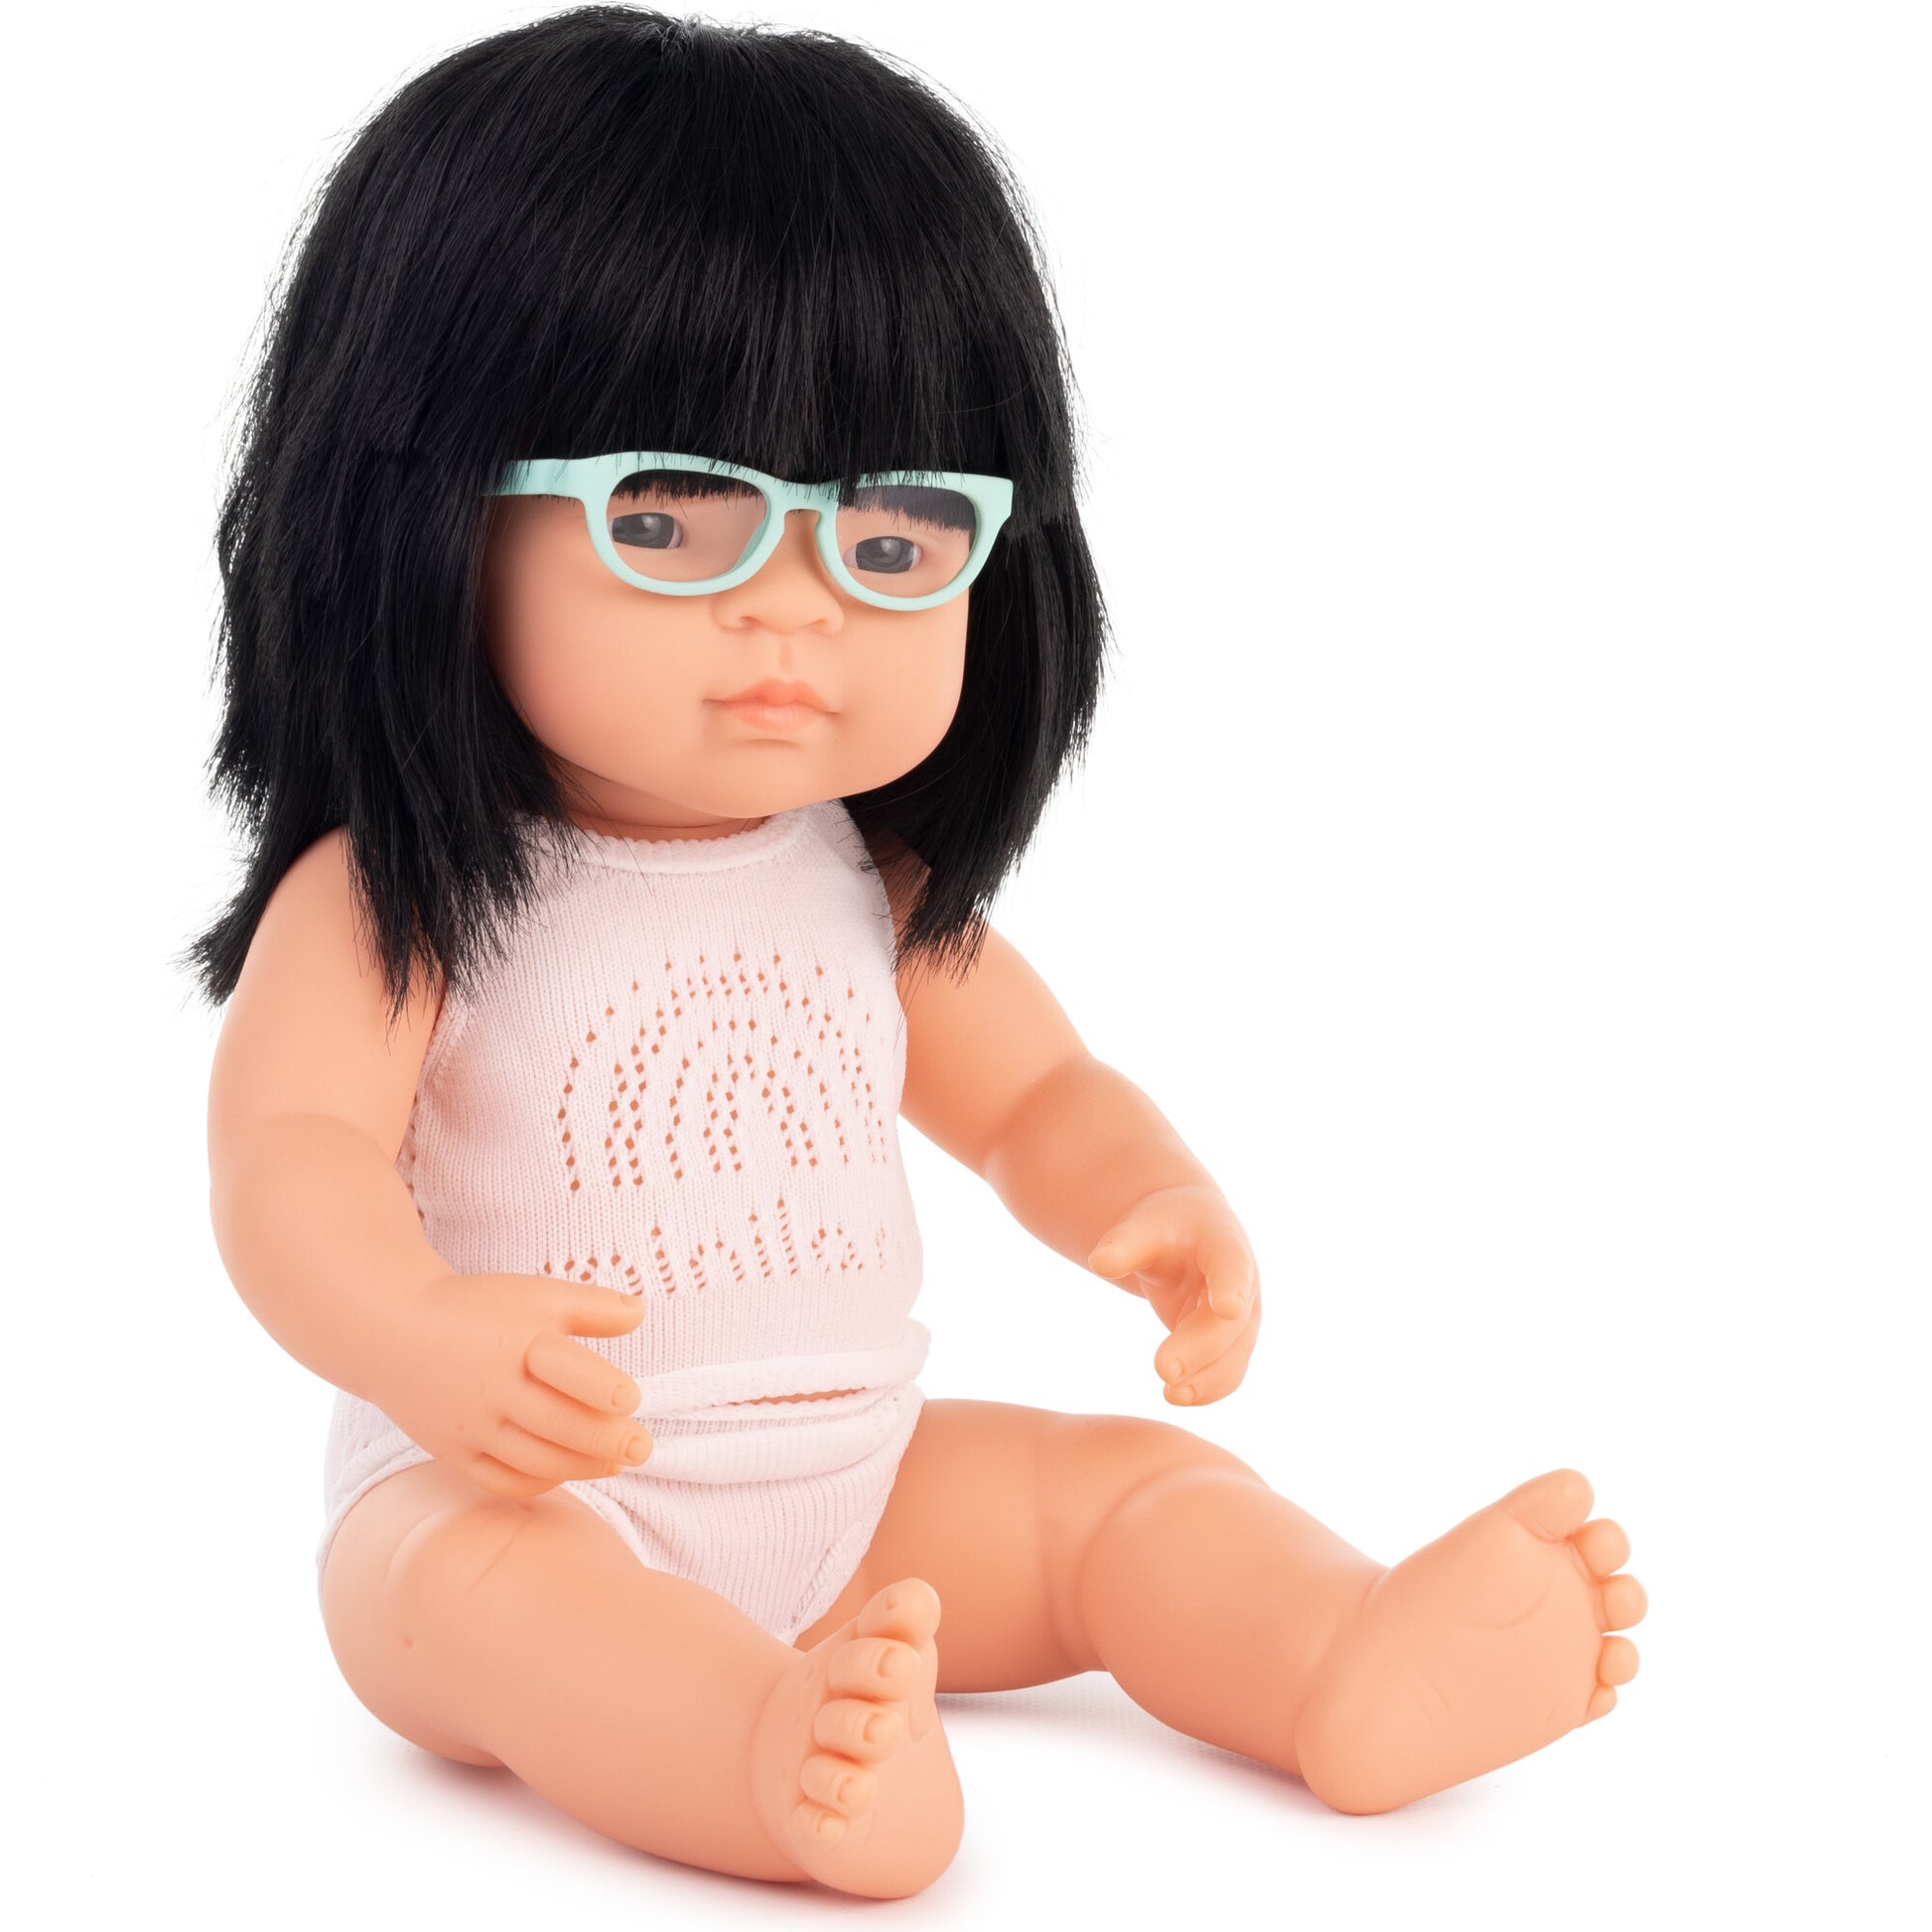 Miniland Baby Doll Asian Girl with Glasses 15" Dolls